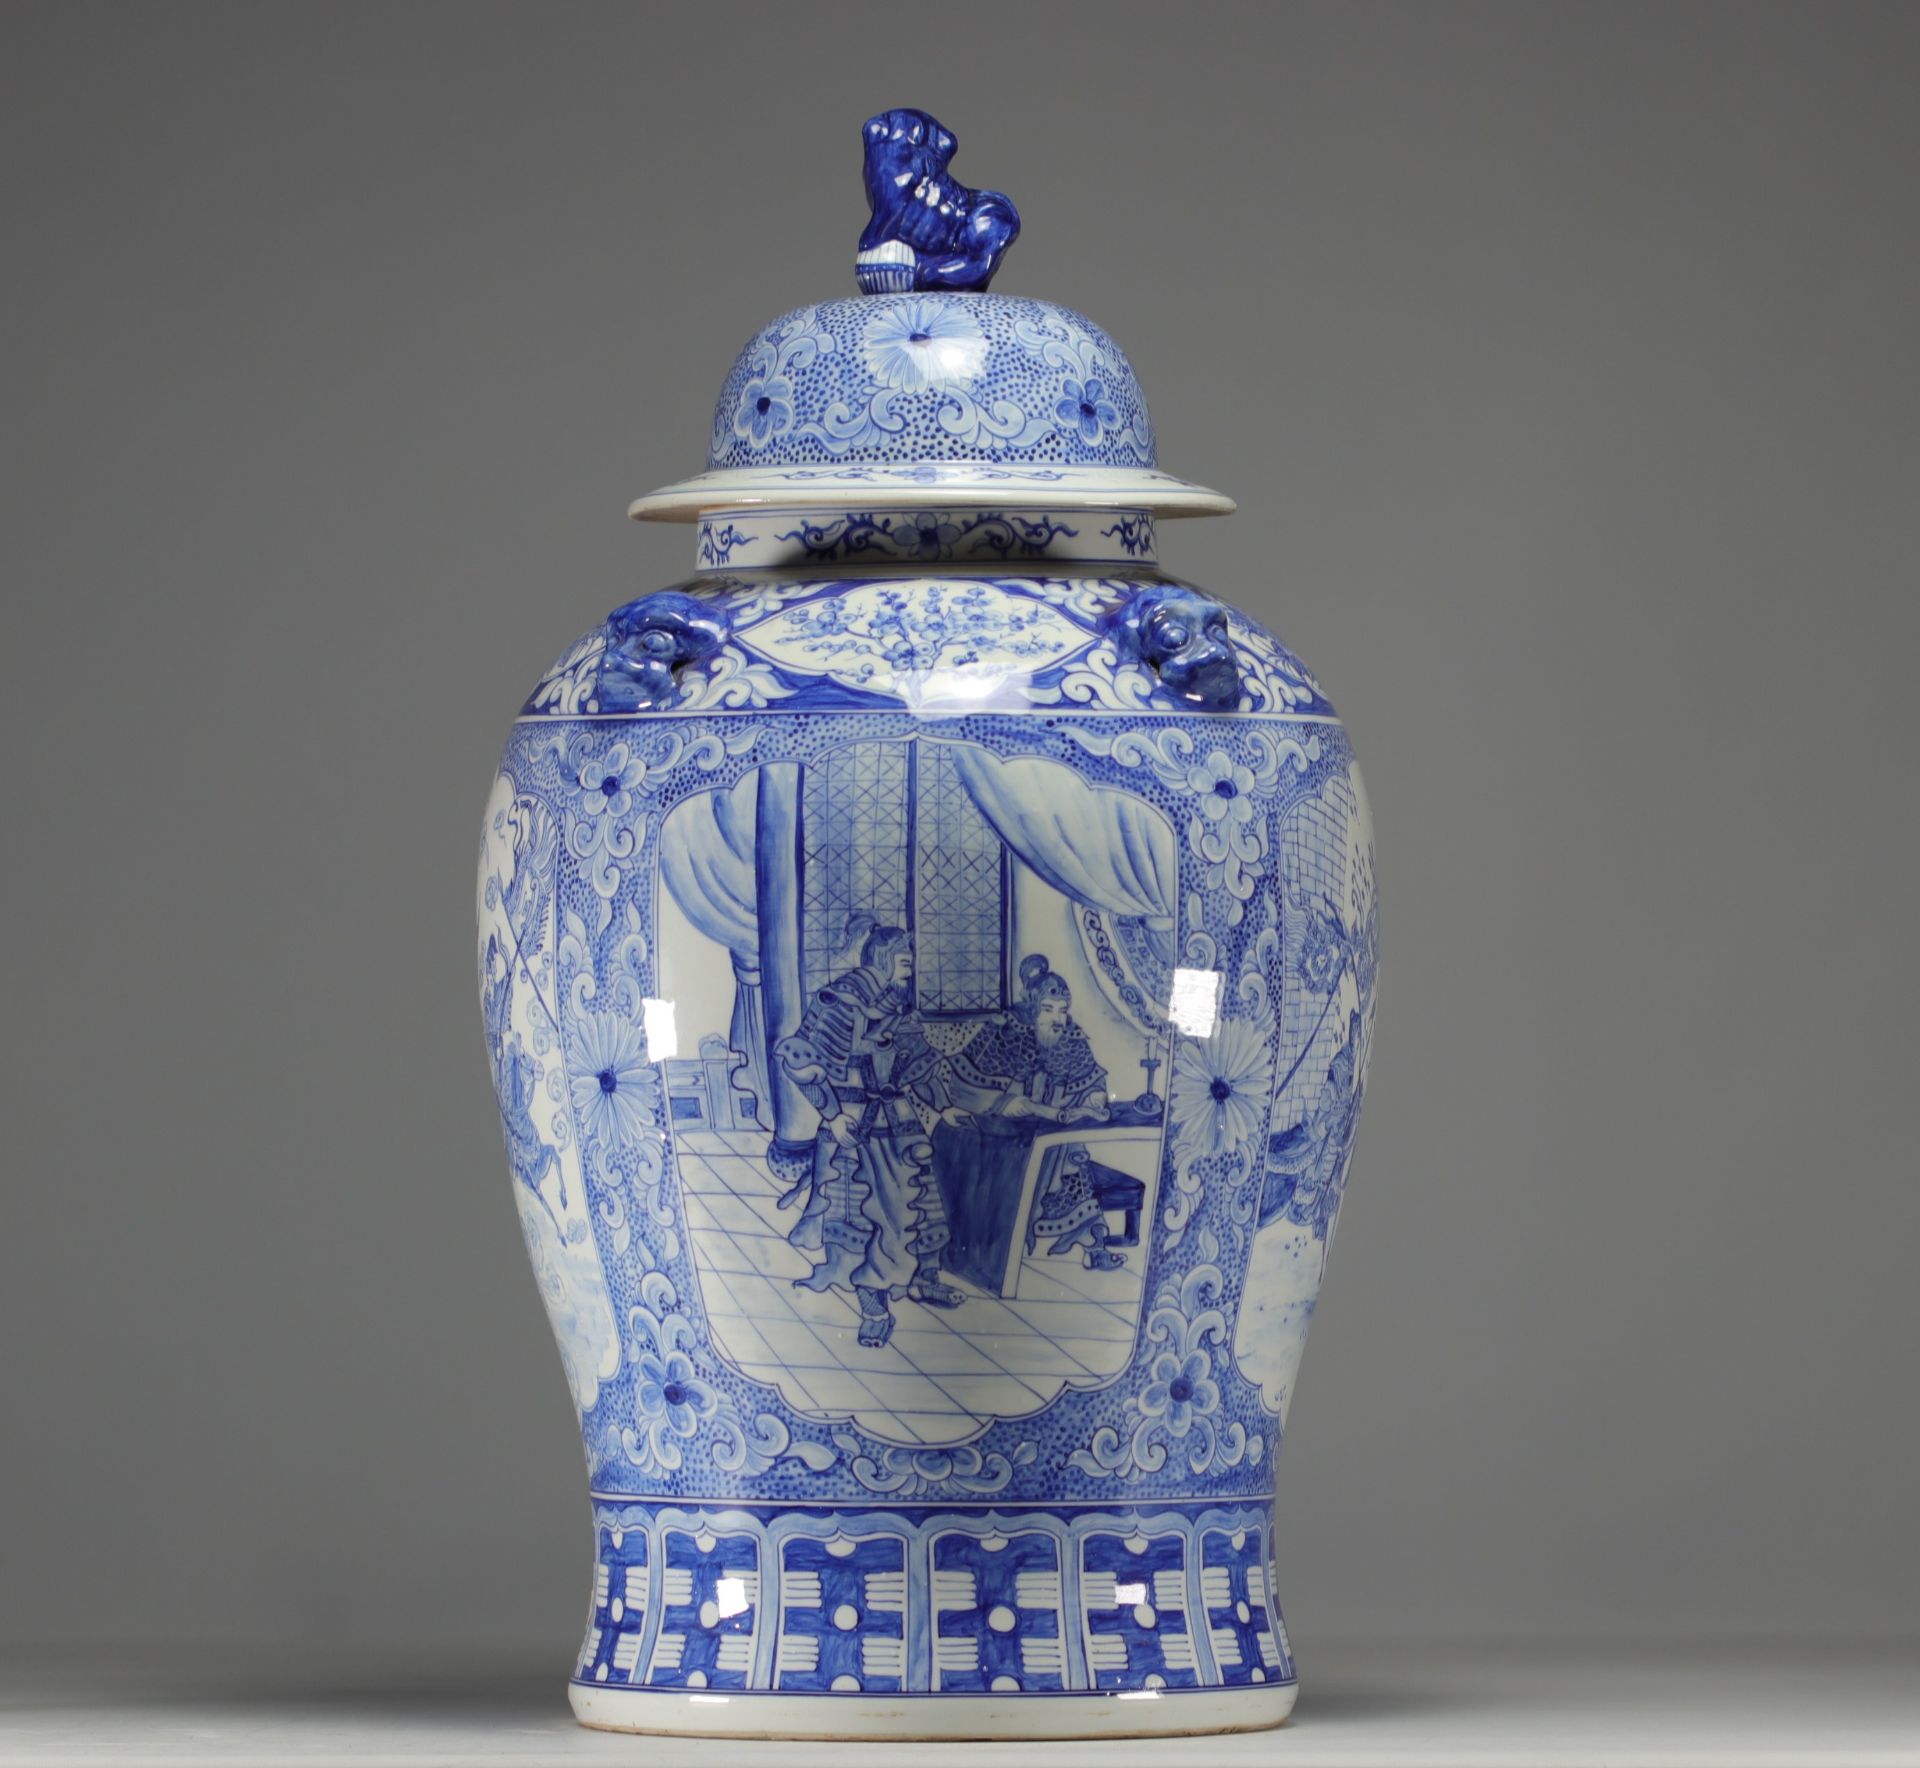 China - Large covered vase in white-blue porcelain with cartouche decoration - Image 2 of 5